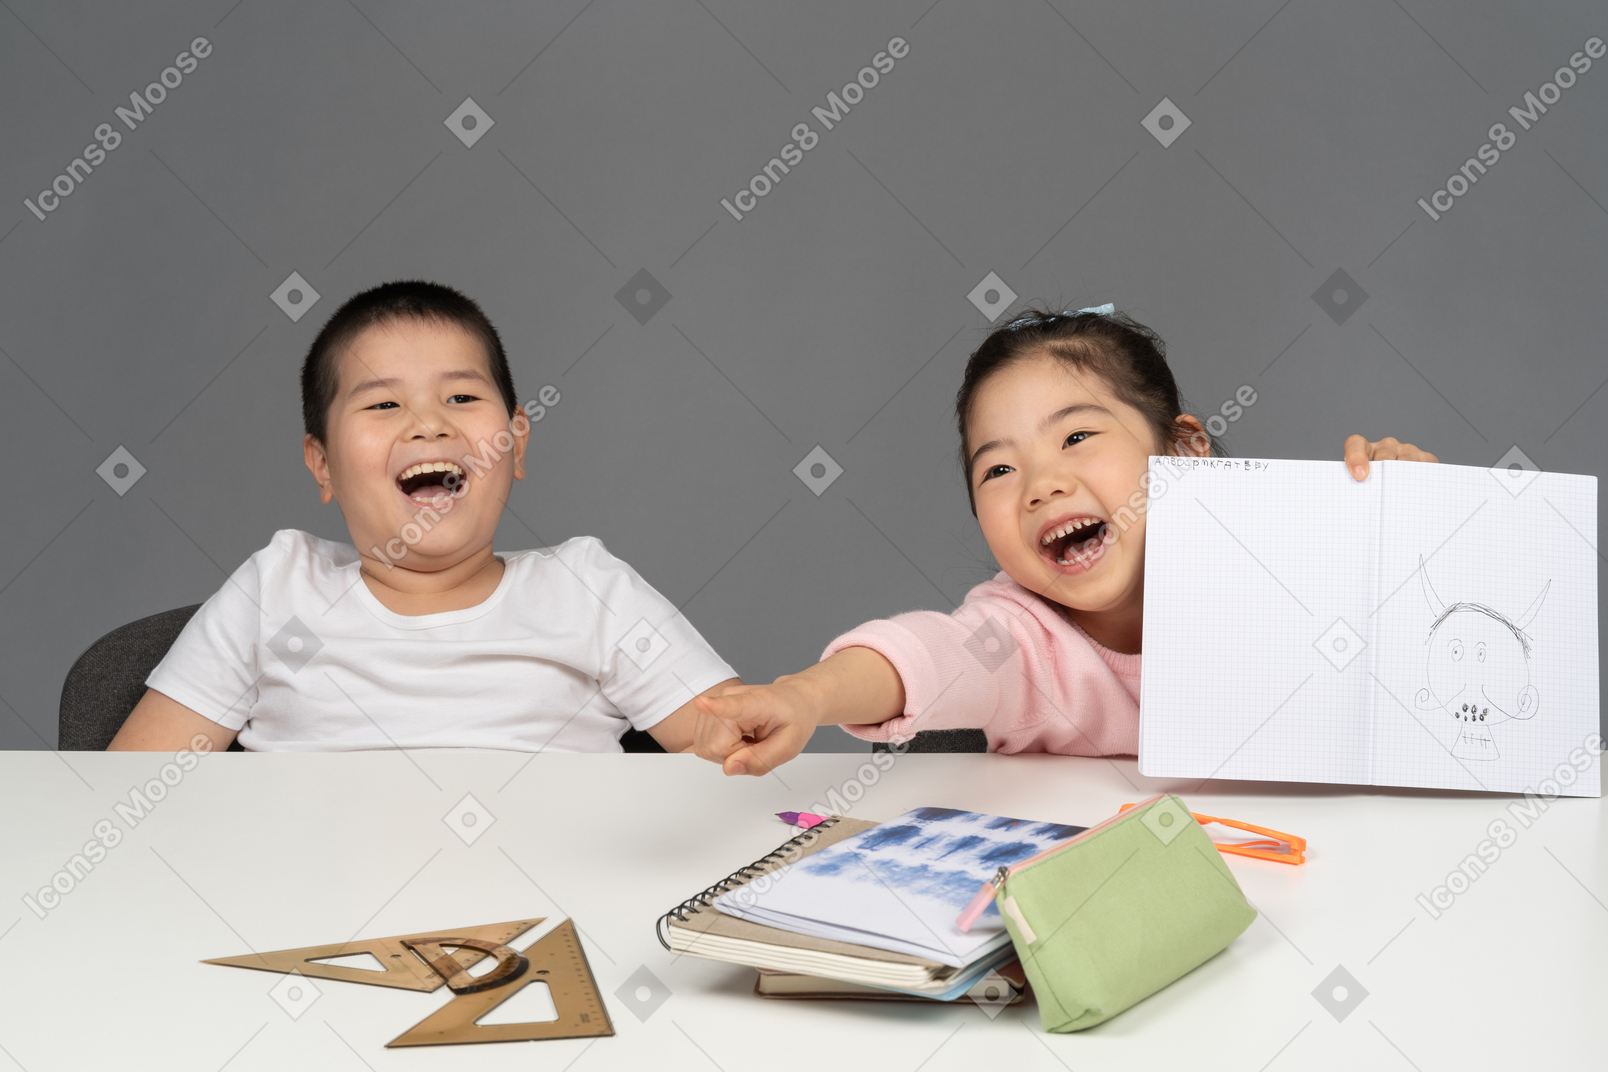 Little girl pointing and laughing with her brother